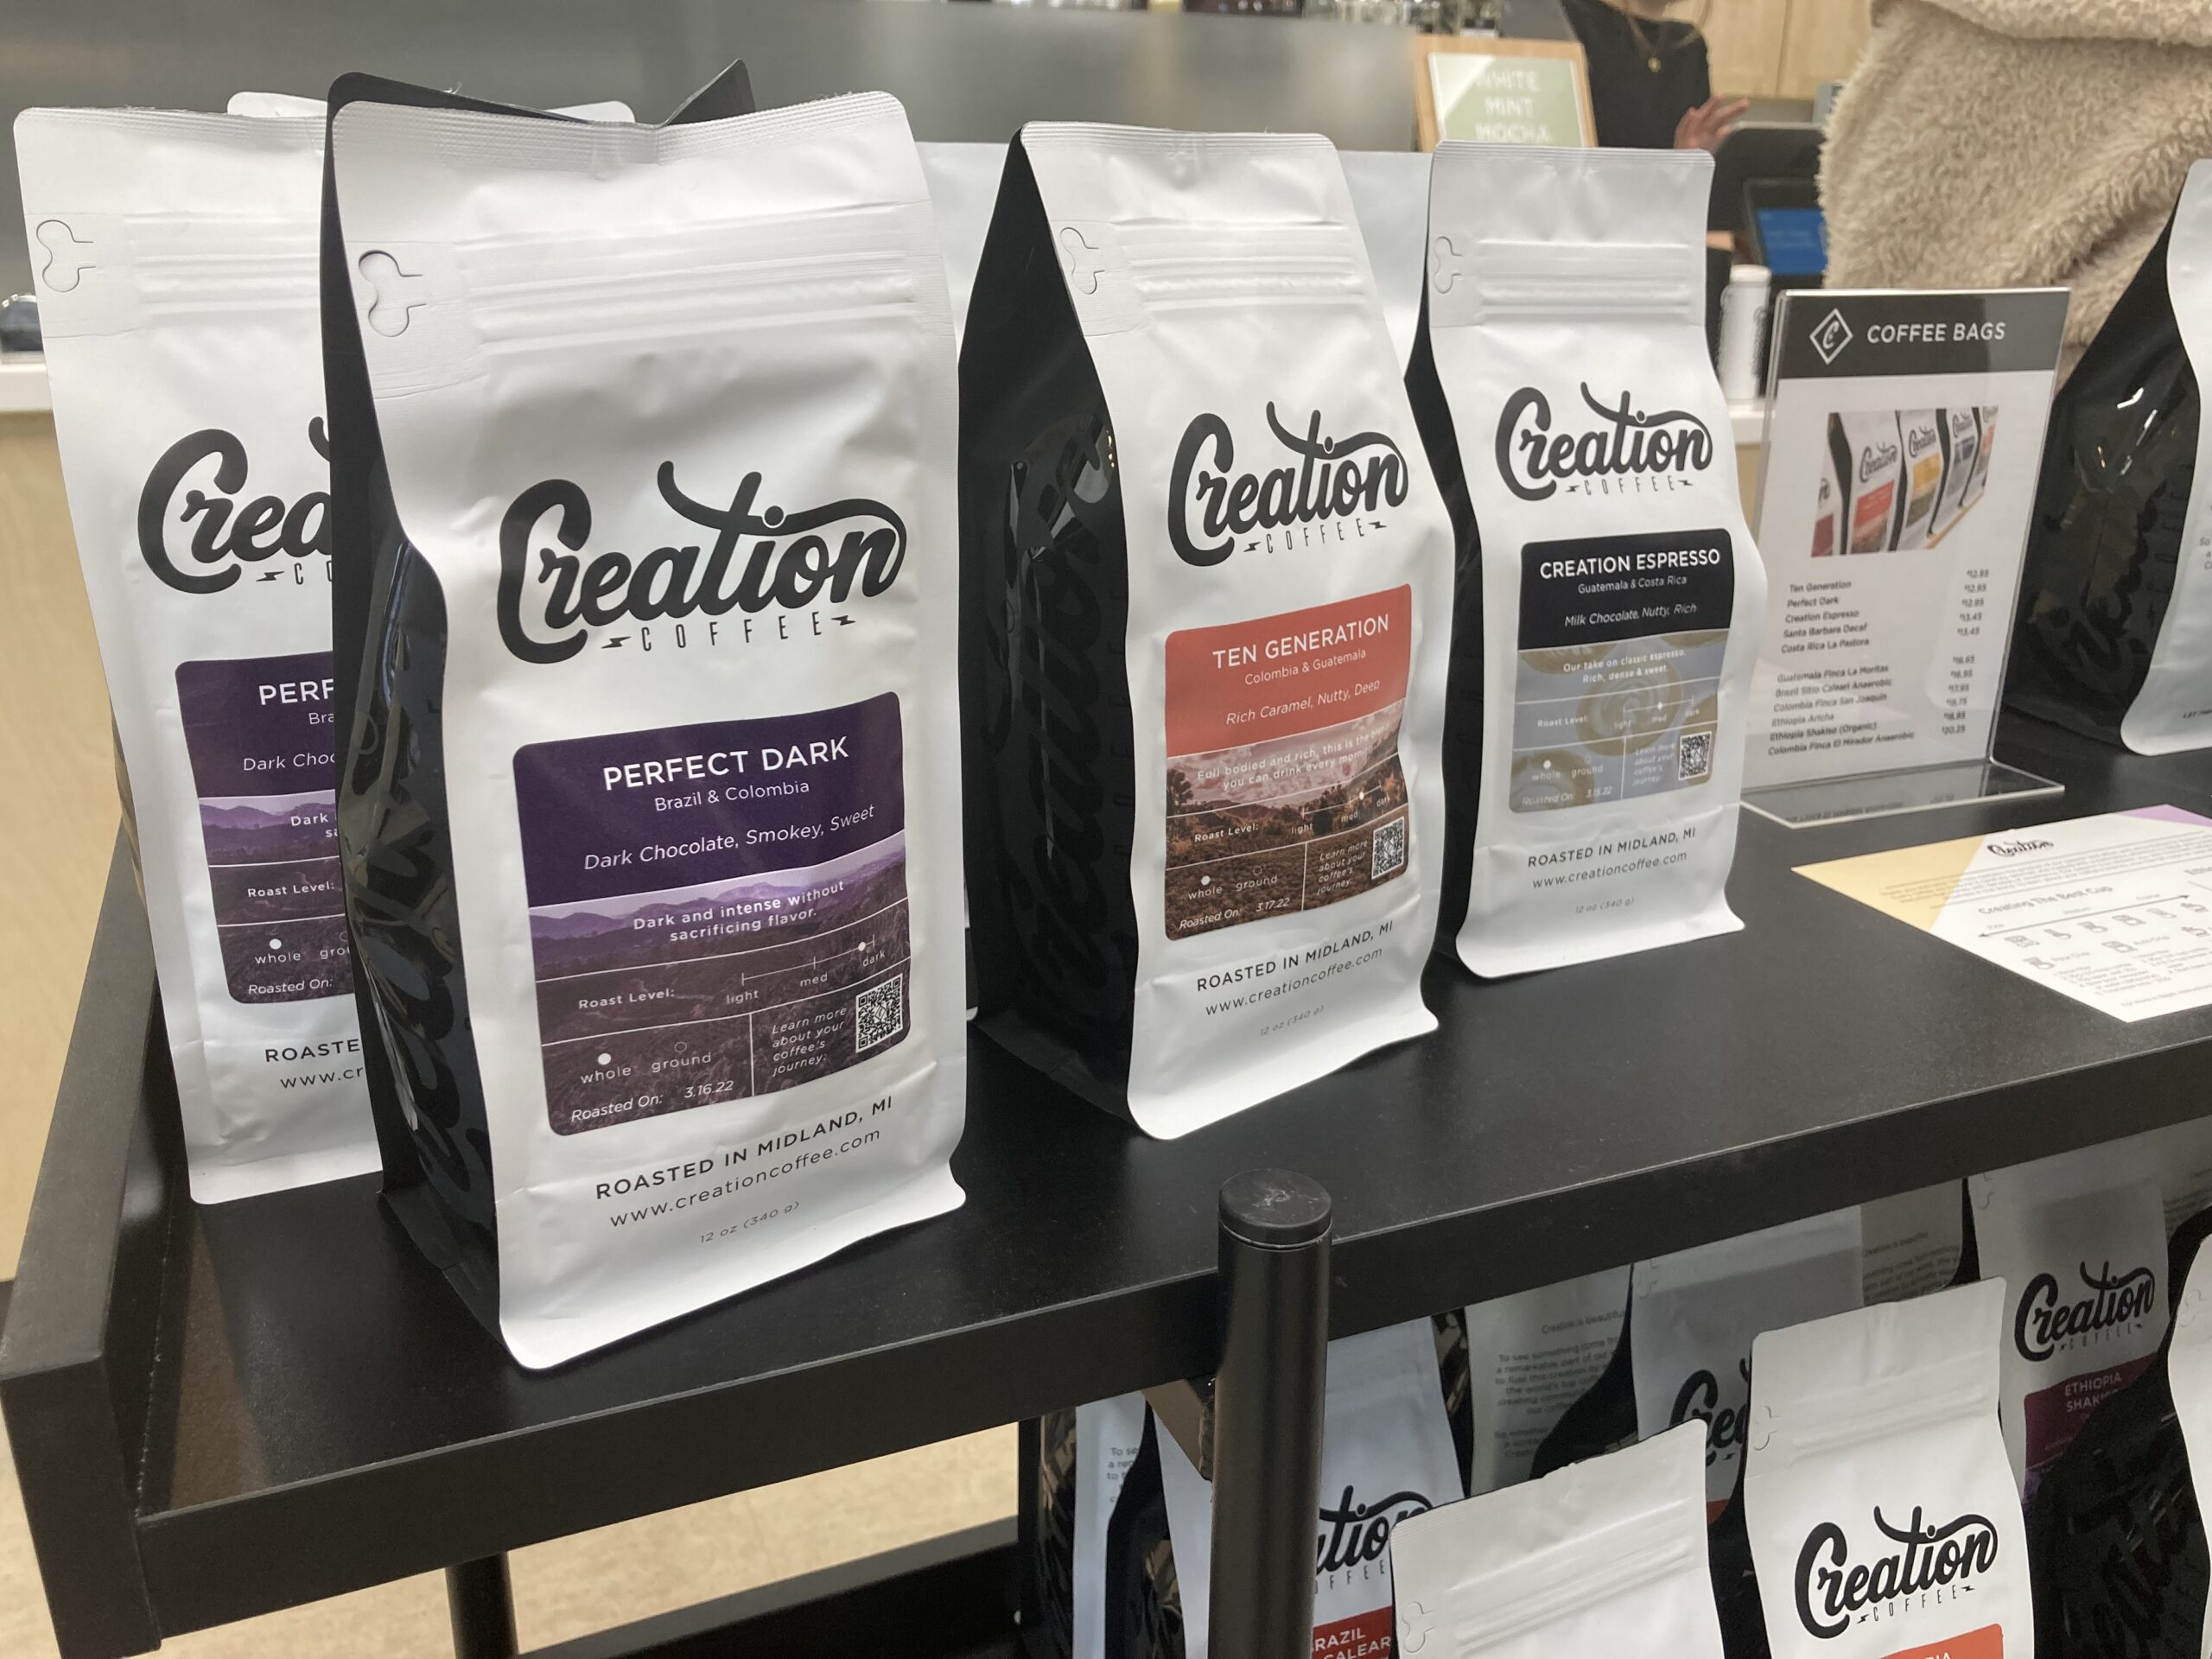 Bags of coffee for sale at Creation Coffee